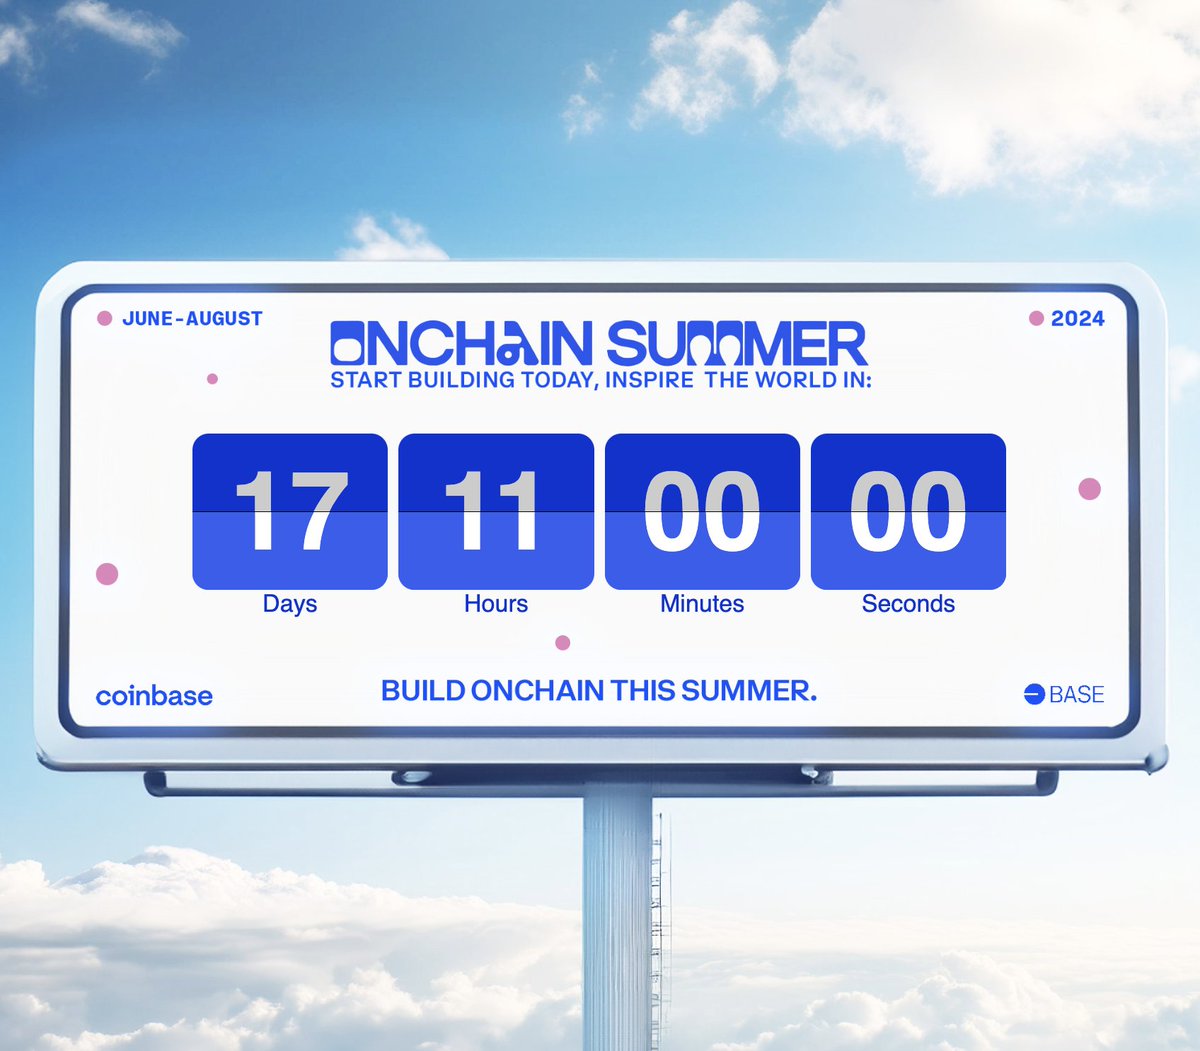 🔵 𝗢𝗡𝗖𝗛𝗔𝗜𝗡 𝗗𝗔𝗜𝗟𝗬 🔵 Onchain Summer is coming 🔆 Countdown the seconds by minting this billboard created by @mx1000m zora.co/collect/base:0…